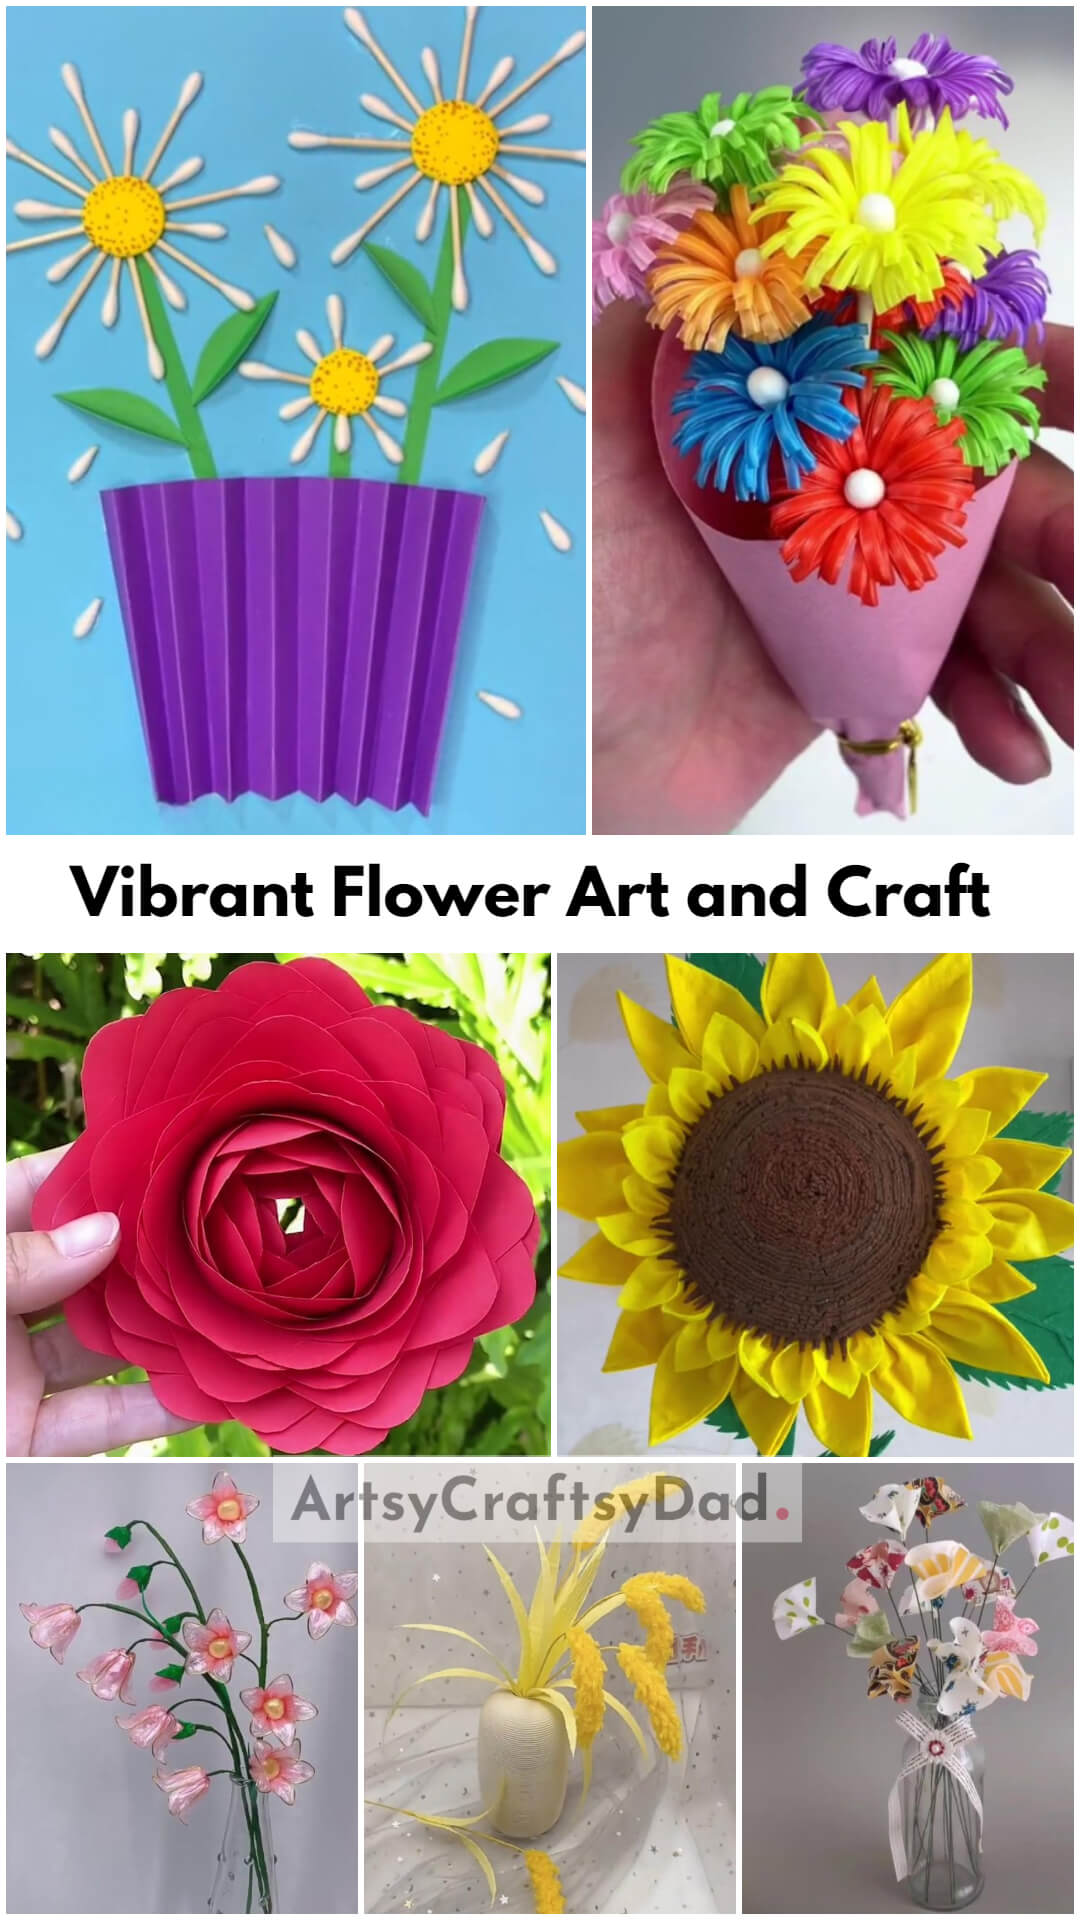 Vibrant Flower Art and Craft Projects Using Recycled Material